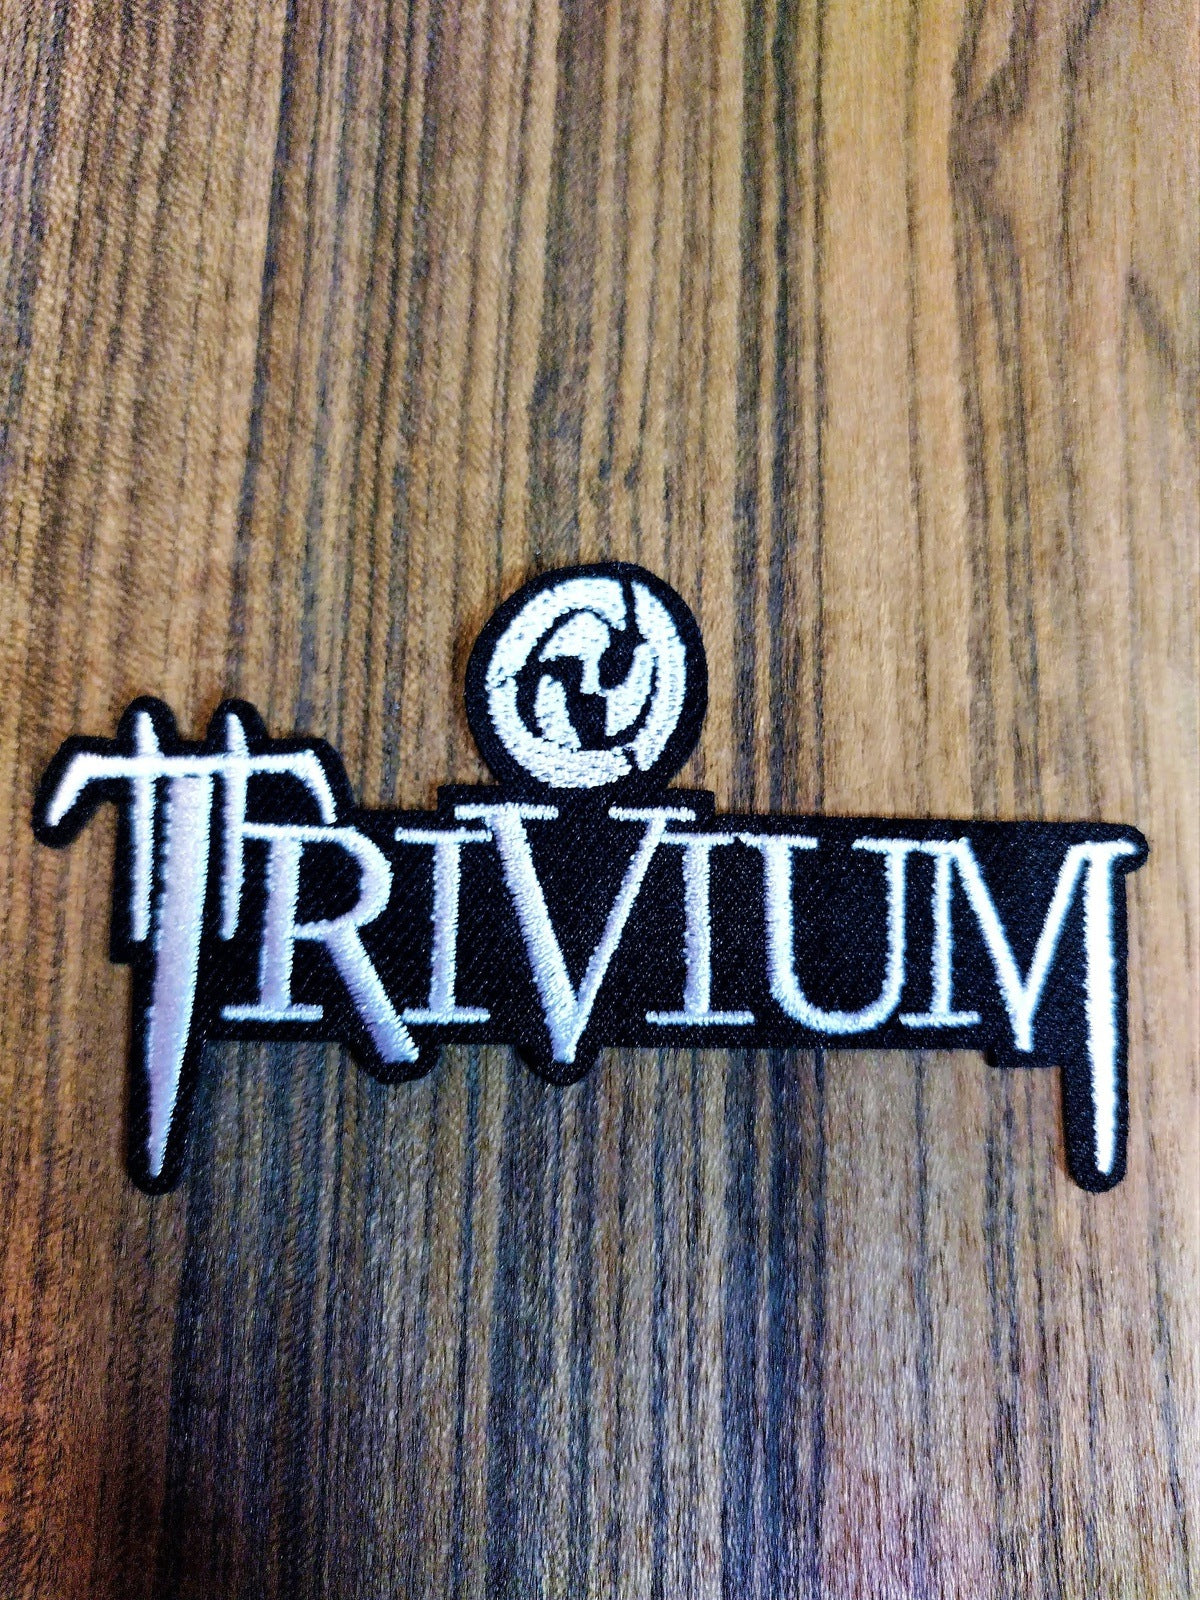 Trivium Patch approx. 3.5 inches